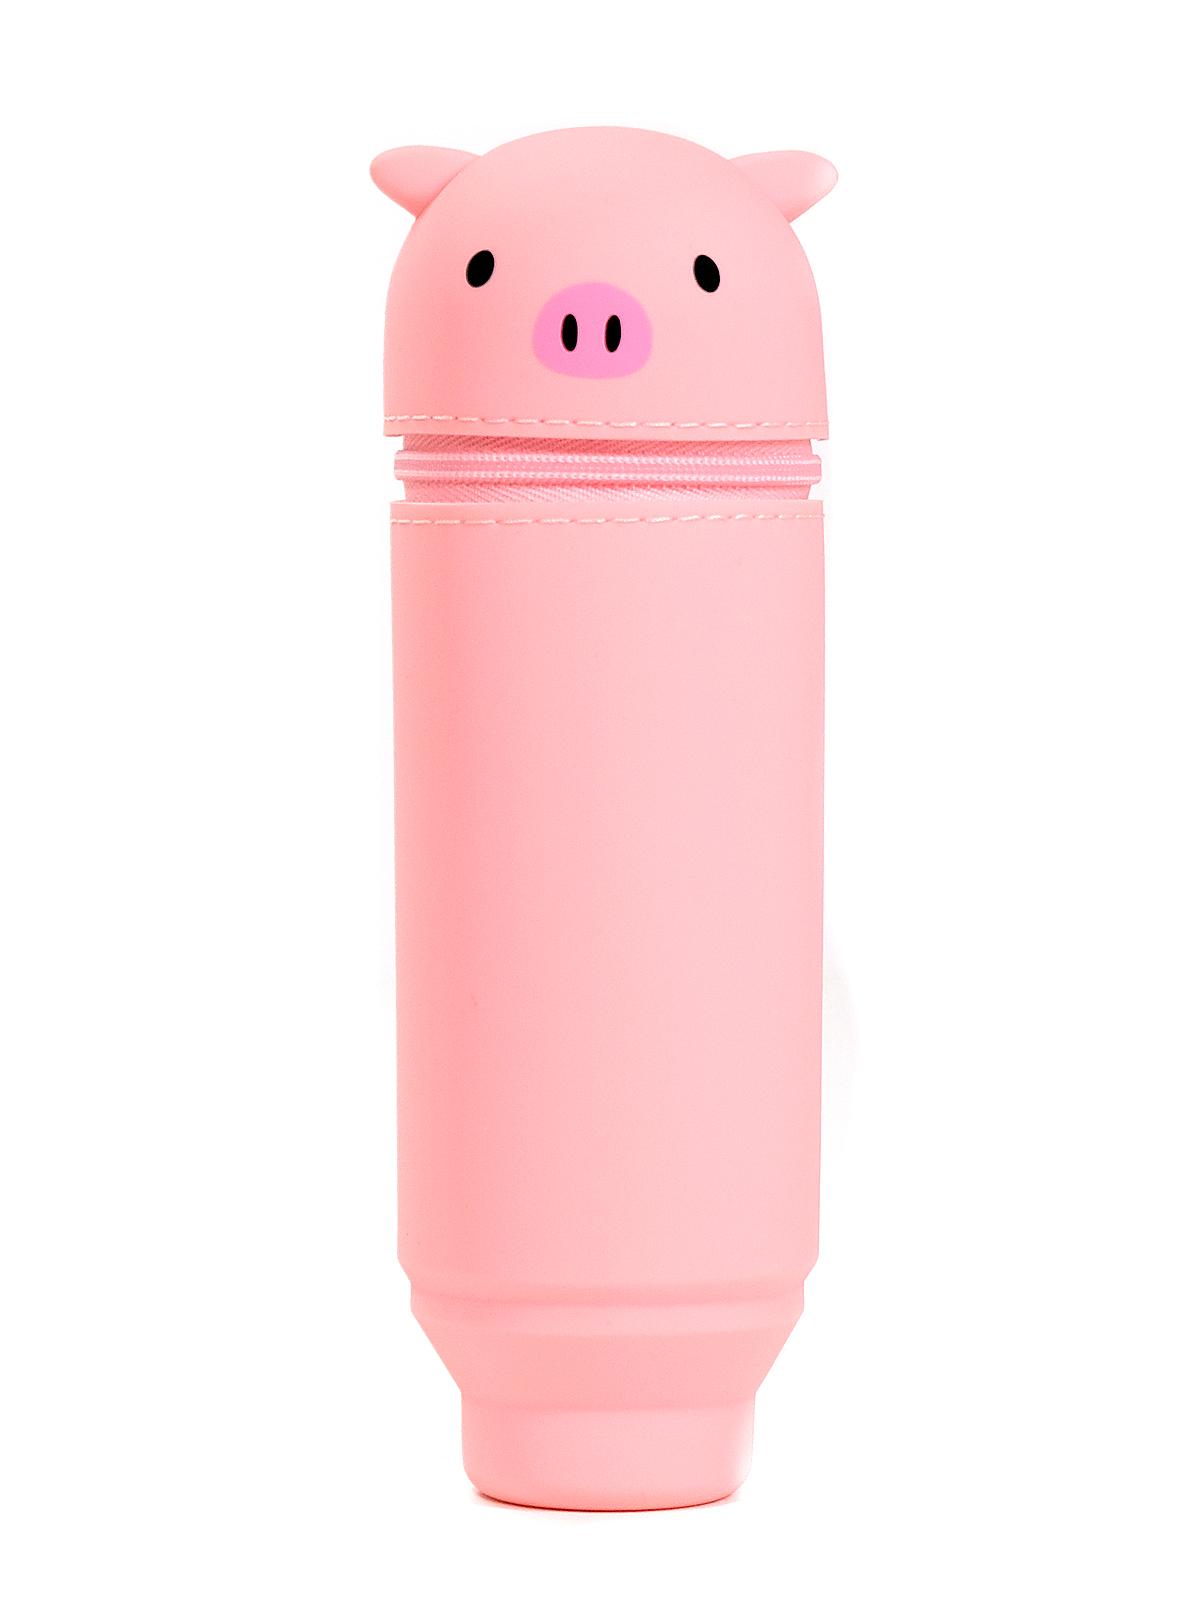 Stand-Up Pen Cases Pig